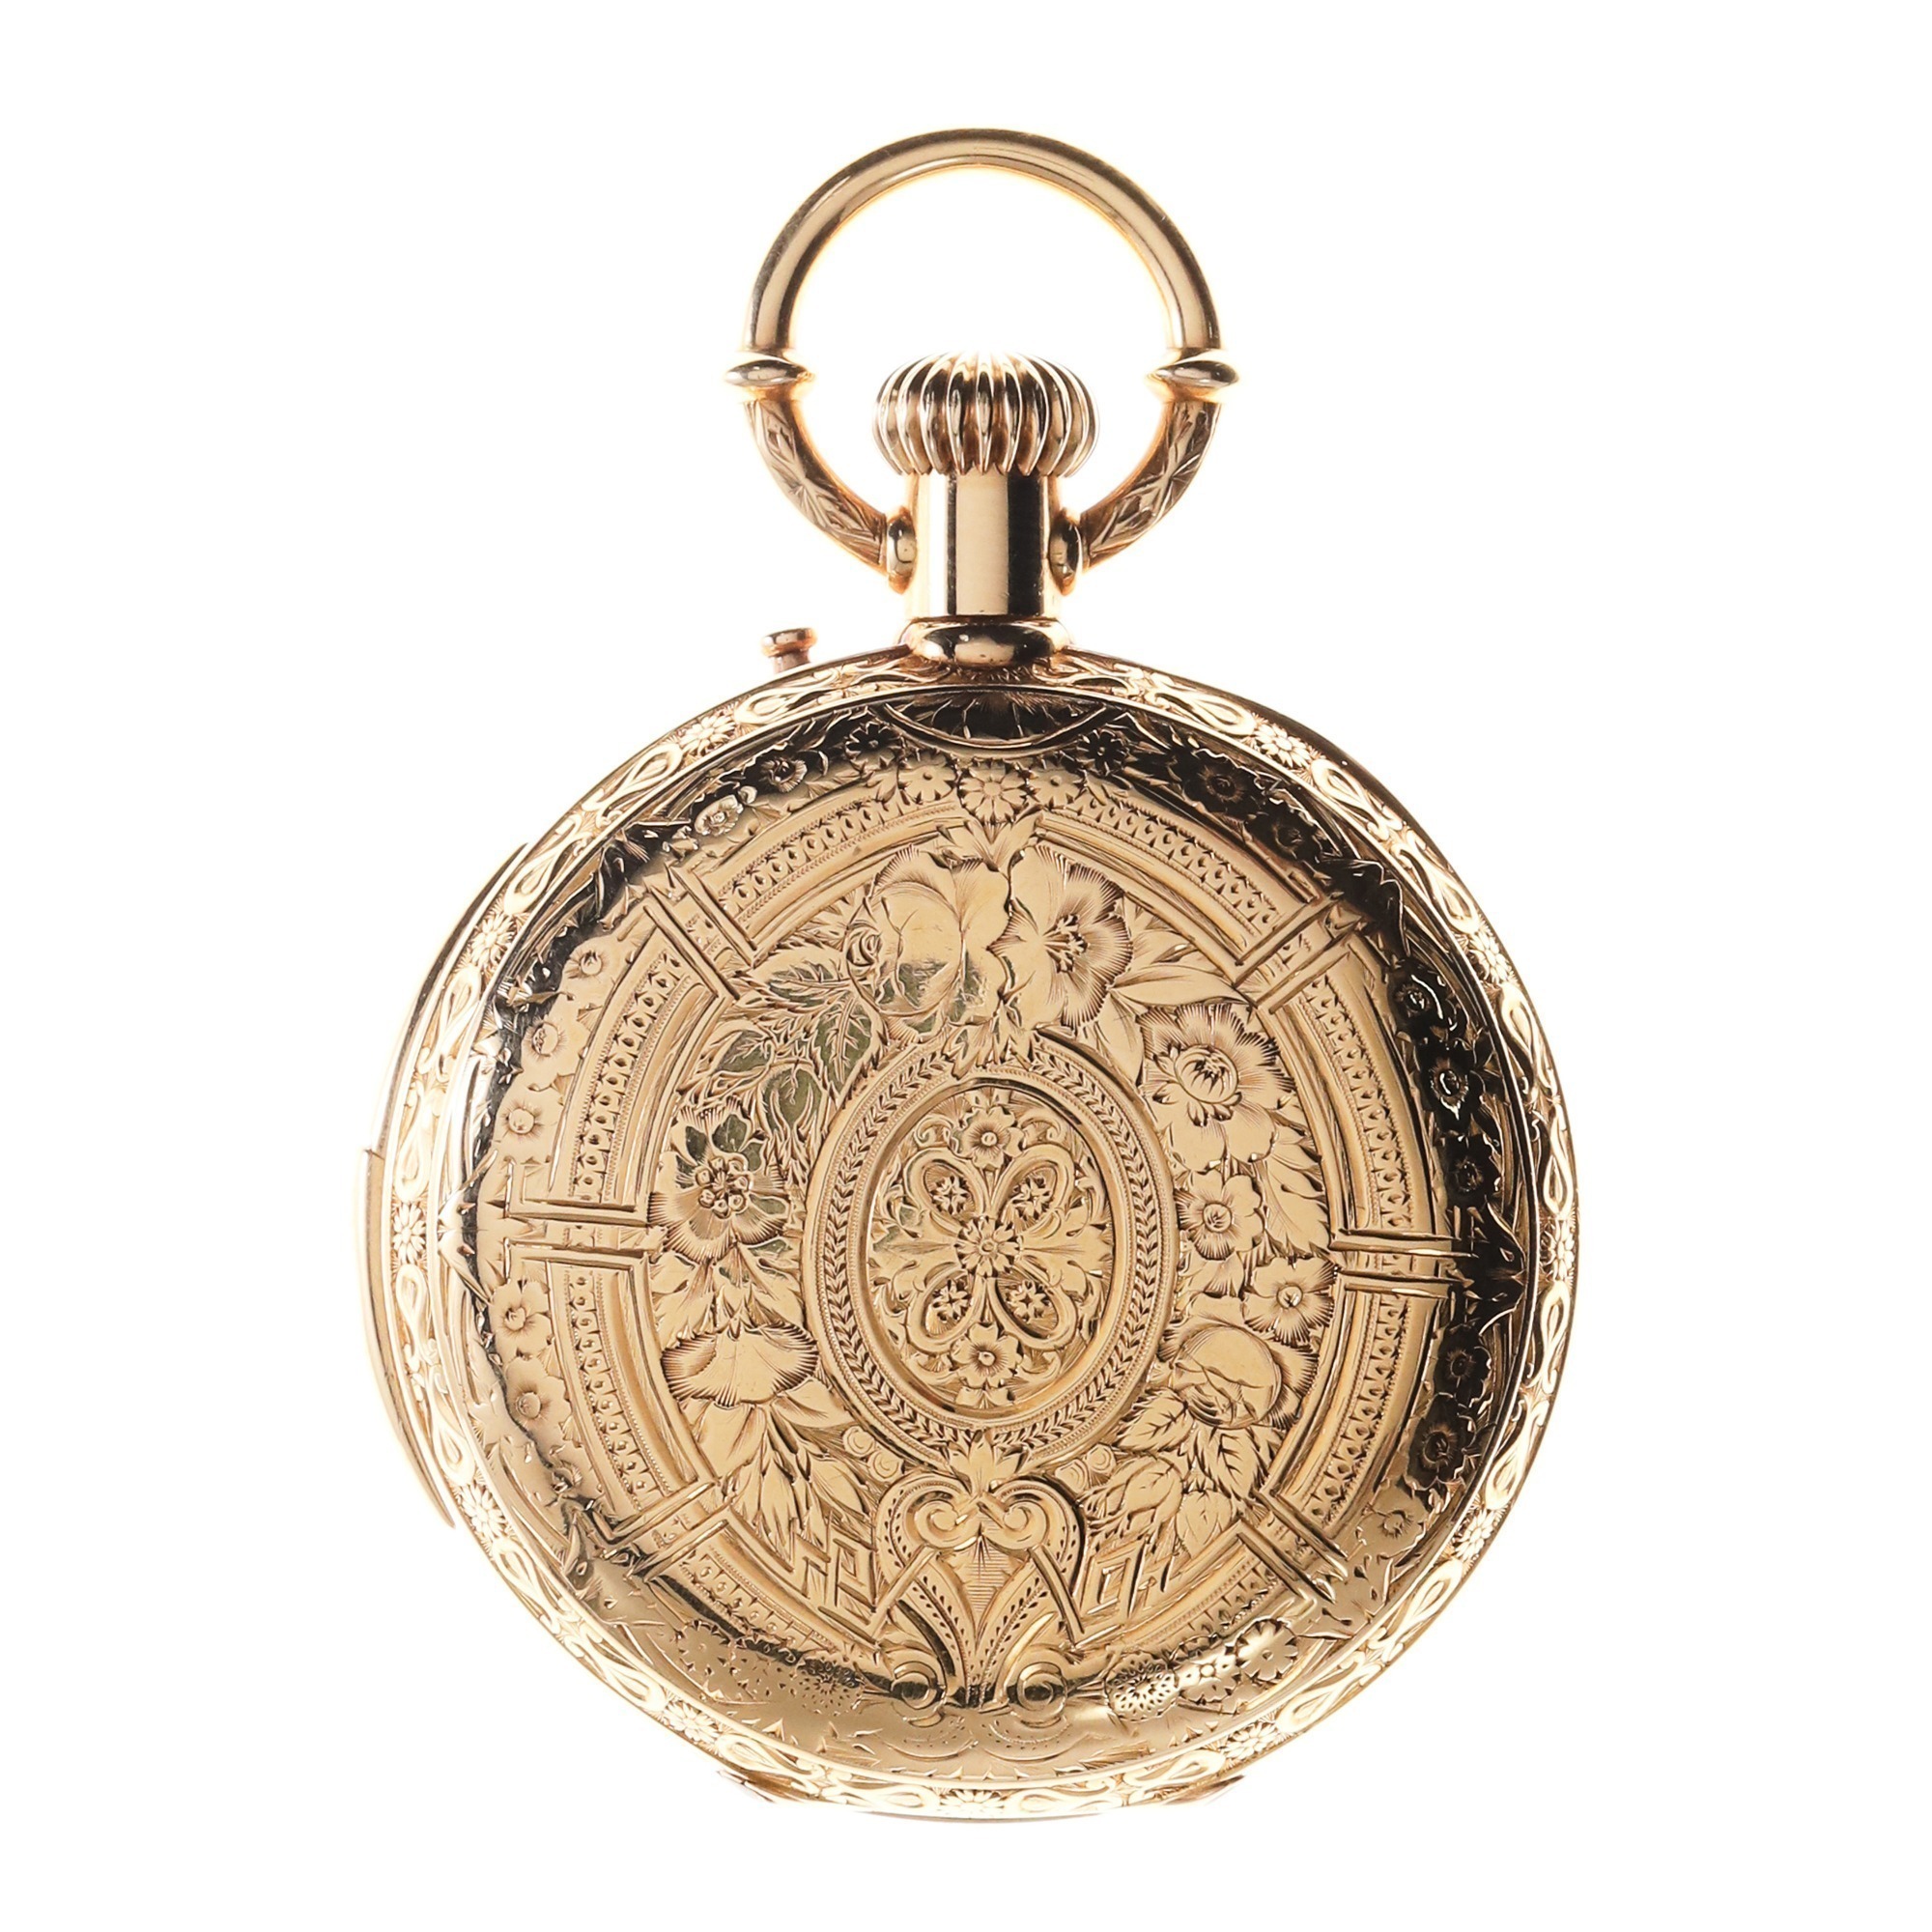 Montandon Minute Repeater 18K Yellow Gold Ornate Hunting Case Pocket Watch